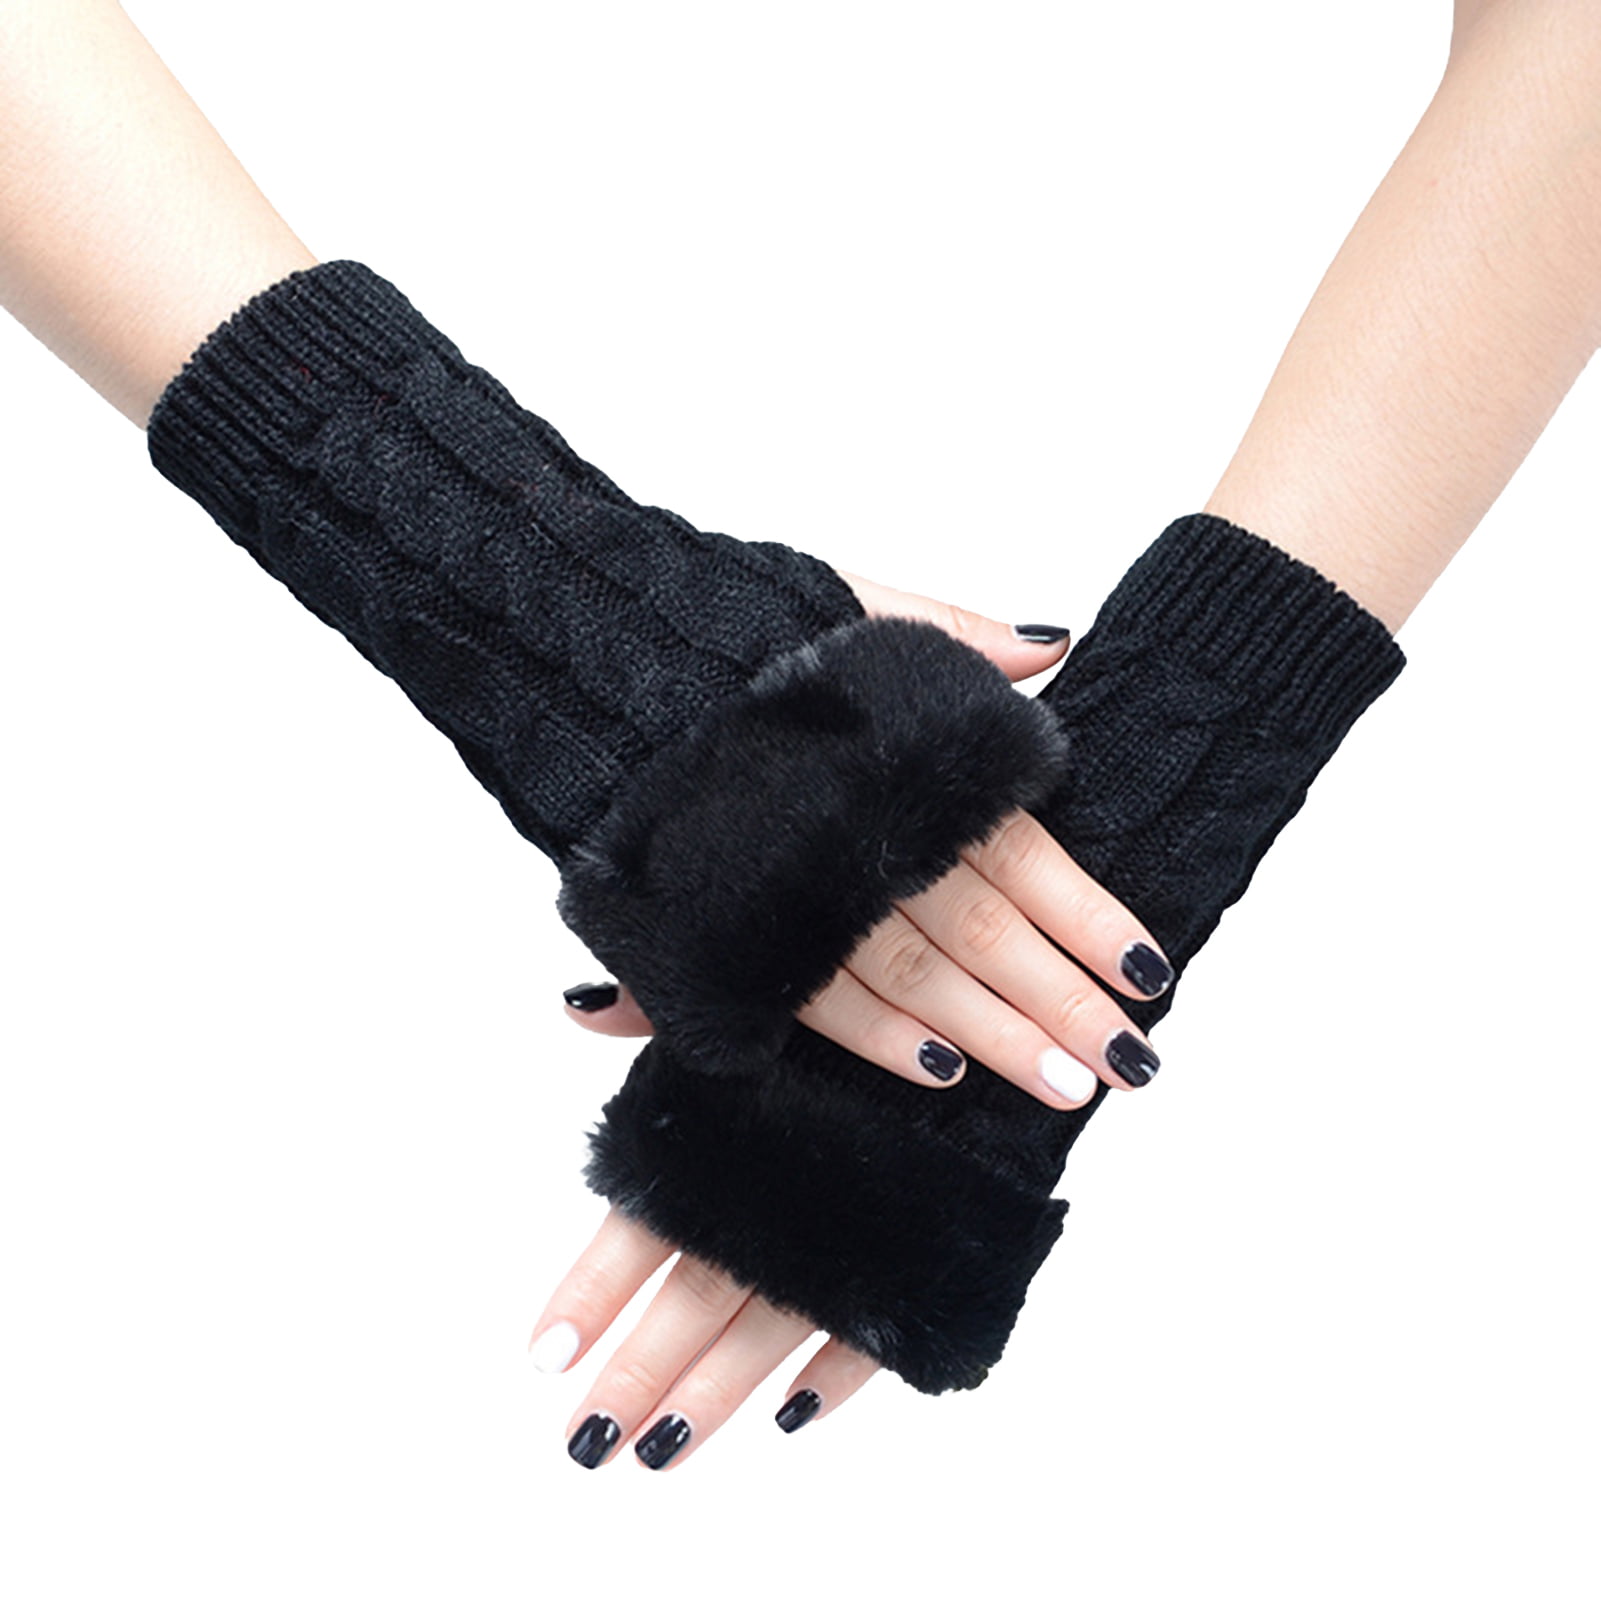 1 Pair black Gripper thermal one size stretch magic driving gloves men womens